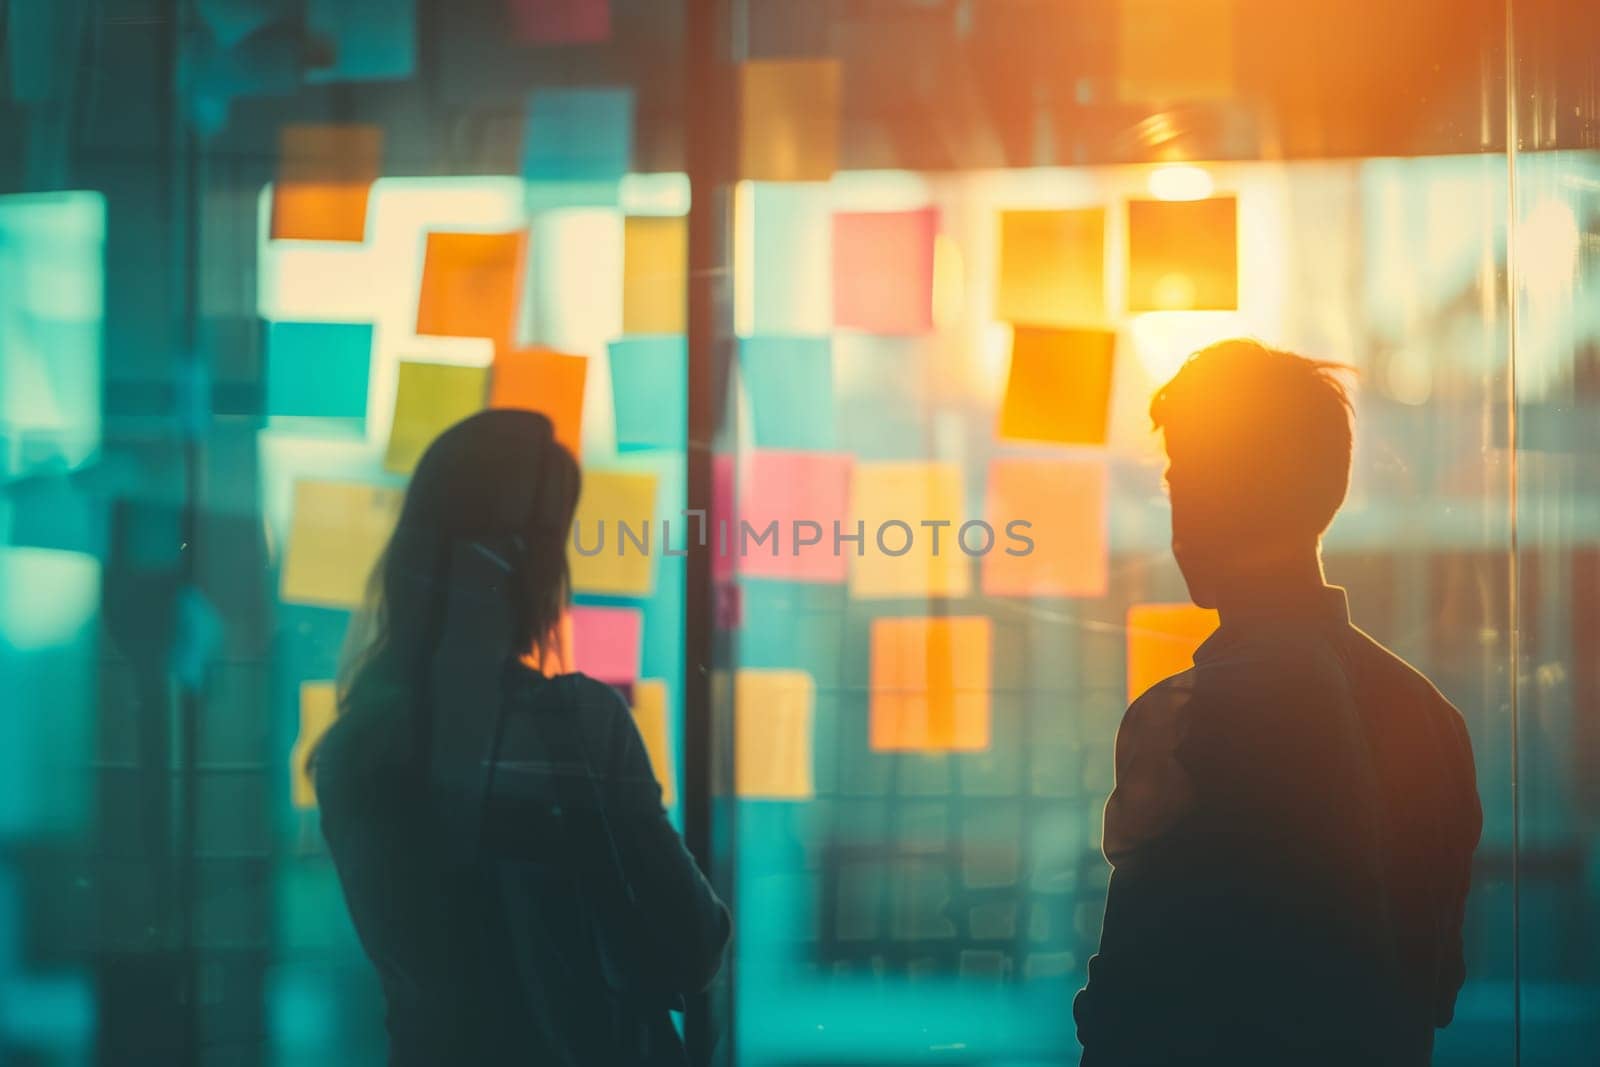 A man and a woman are enjoying a fun event surrounded by a rectangle of art on a glass wall. Sticky notes in shades of magenta and electric blue create a symmetrical visual arts display